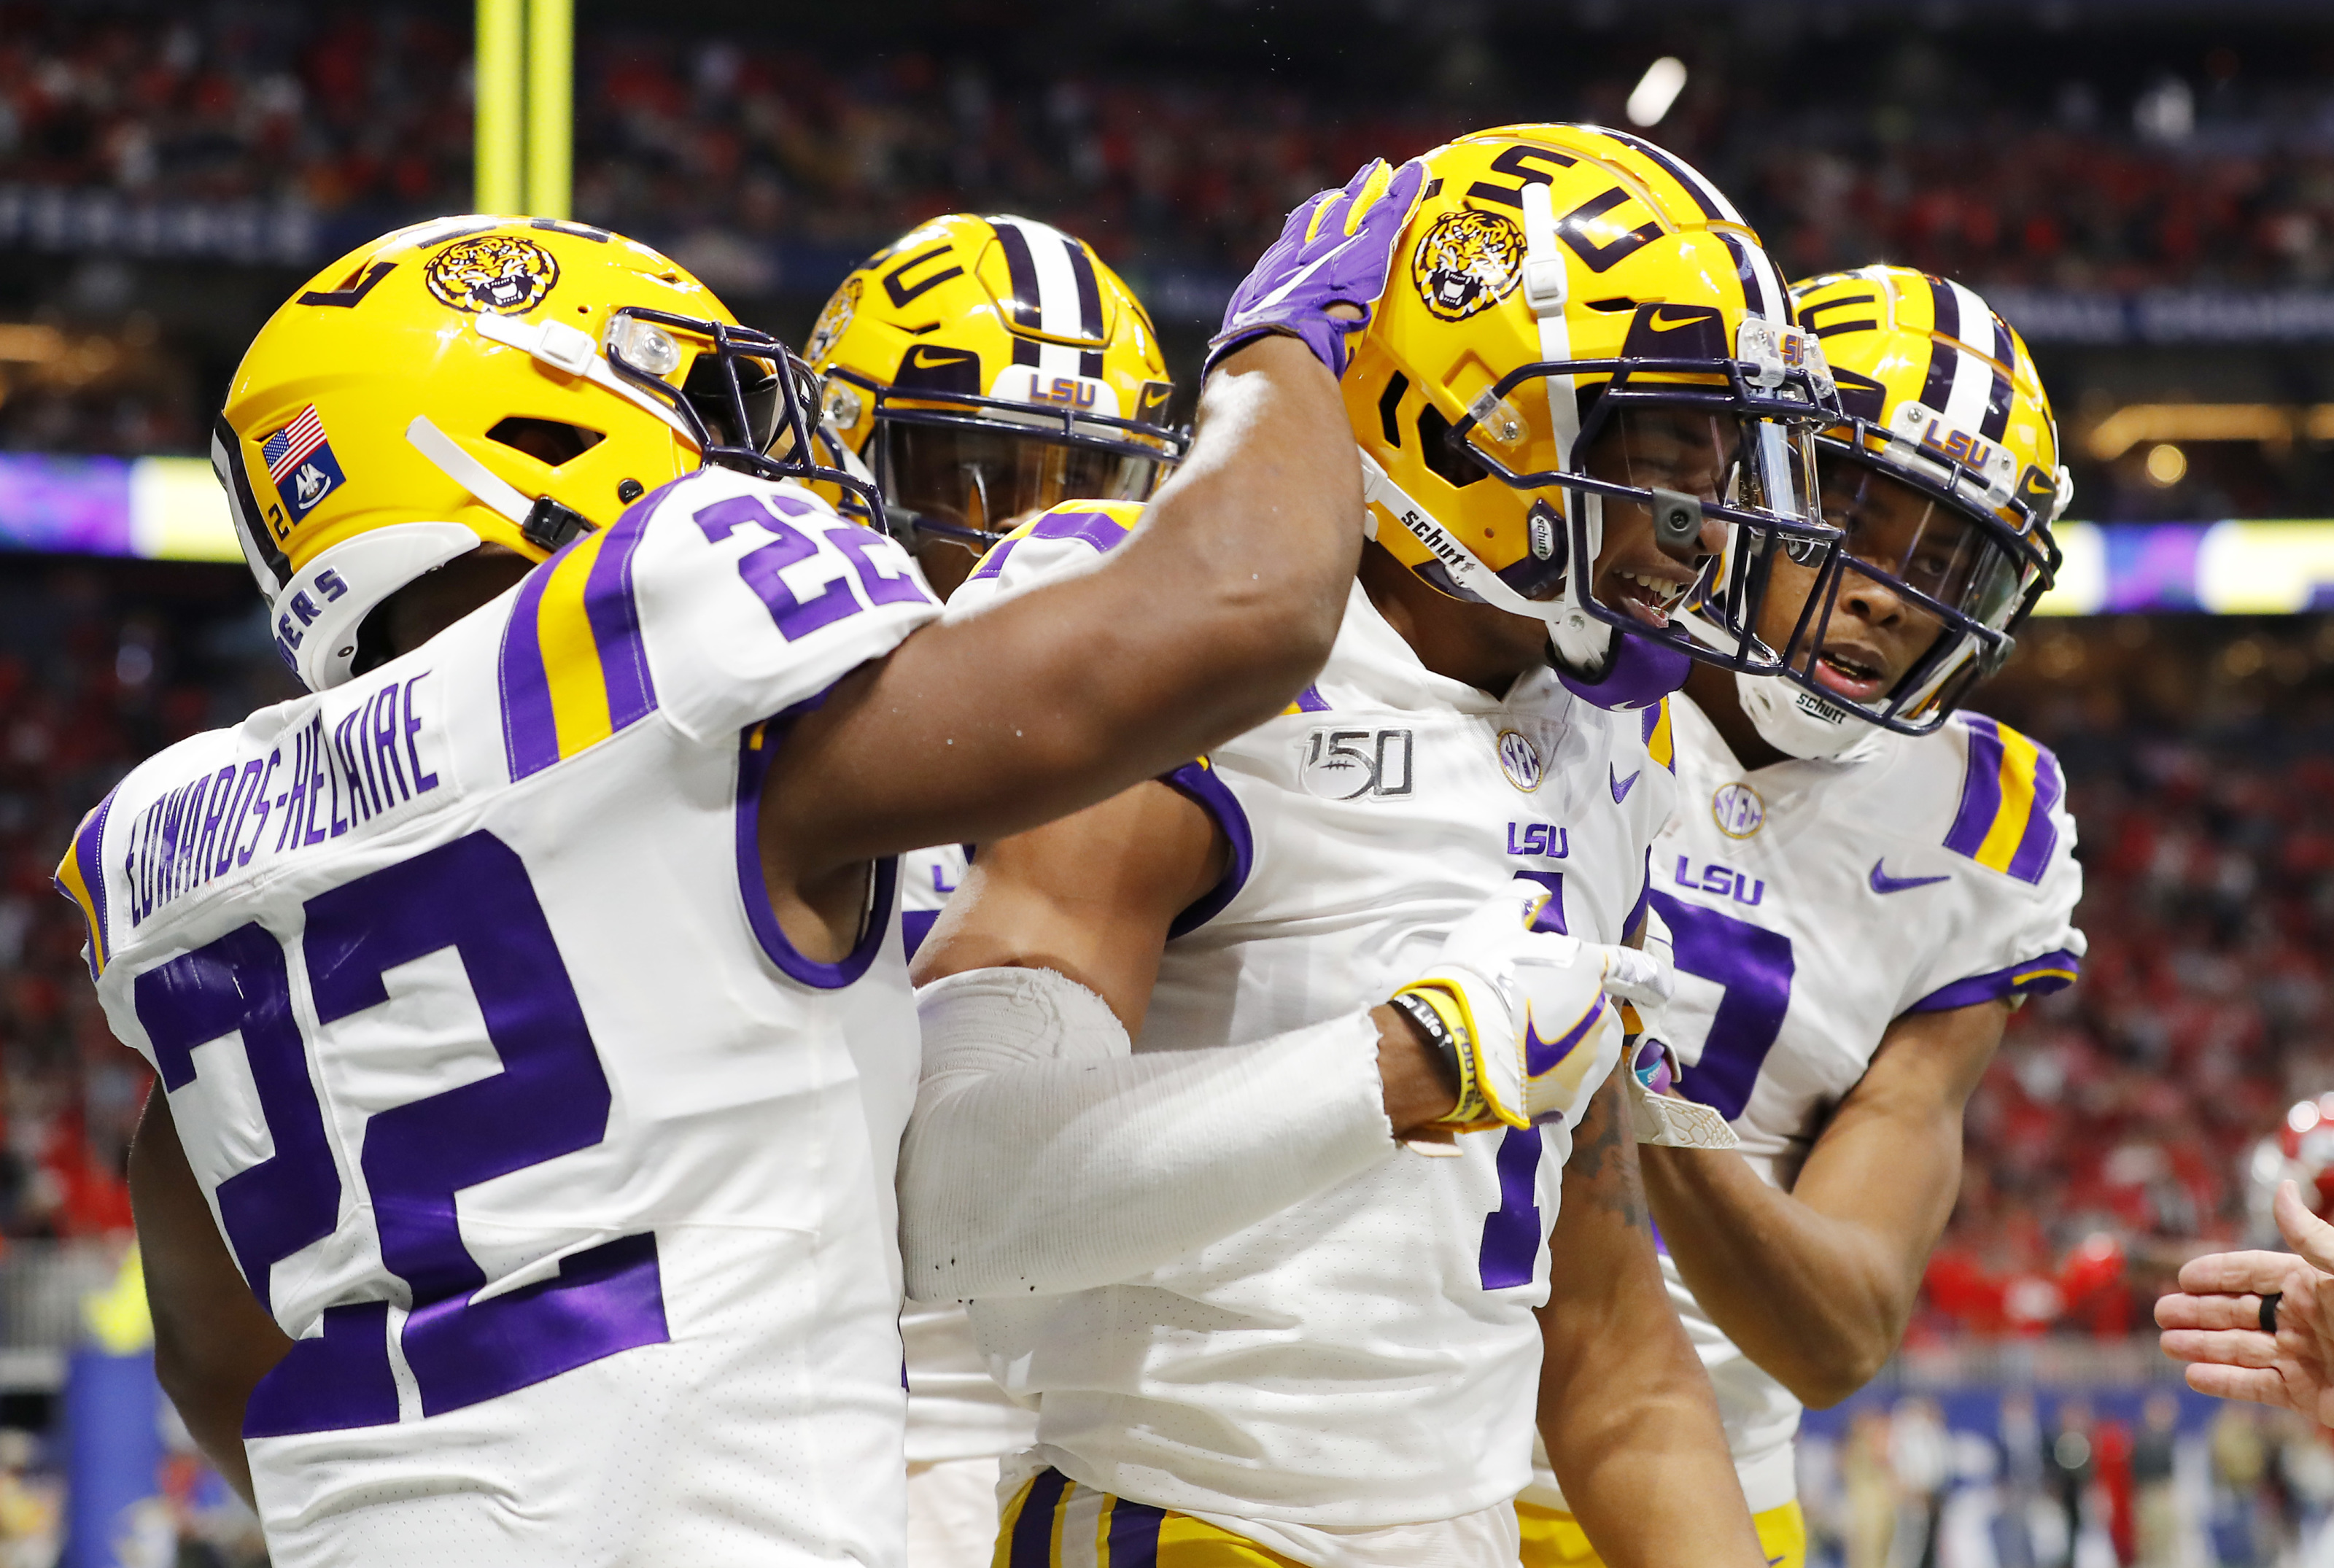 LSU Football: 3 reasons Tigers will win SEC title without Ja'Marr